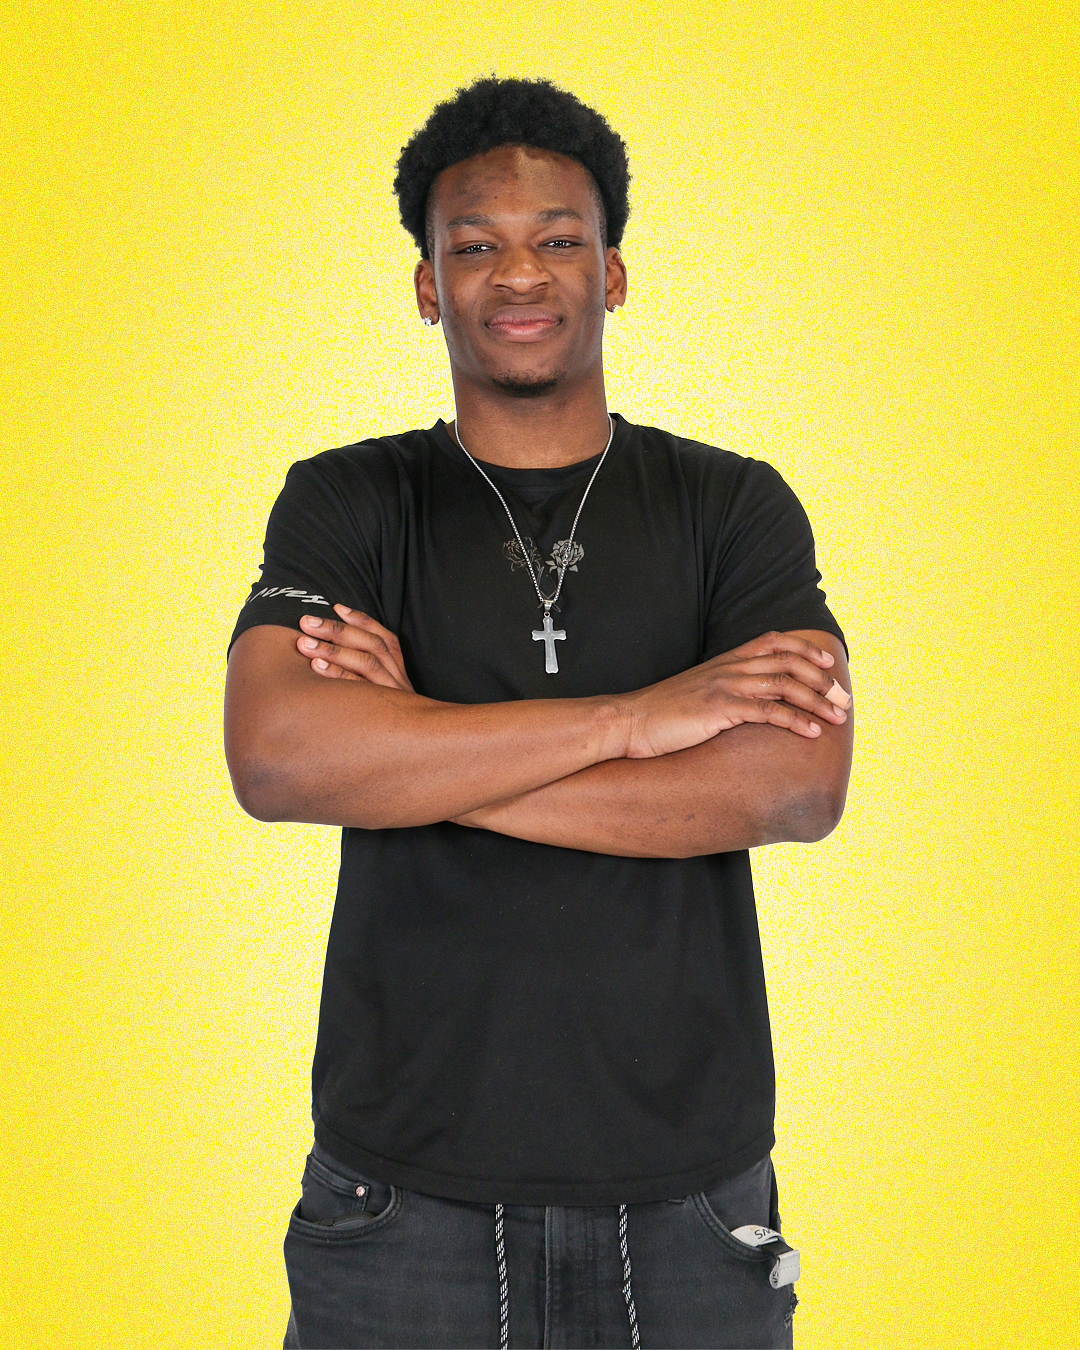 student fedi anifua proudly posing in front of a uo yellow solid color background